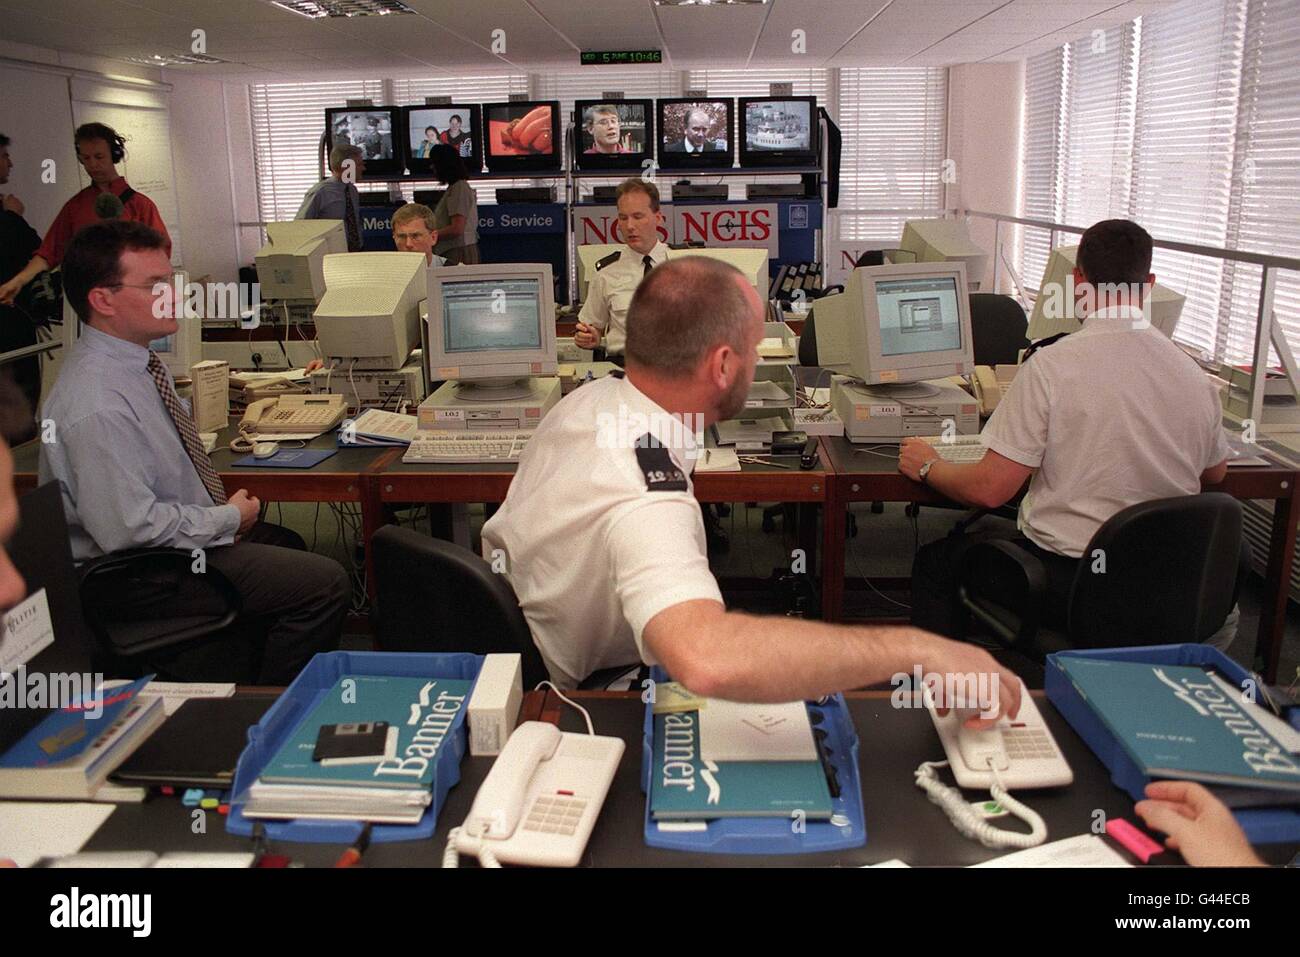 The National Co-Ordinating Centre for Euro '96 at New Scotalnd Yard swings into action in prepartation for the biggest sporting event to take place in this country since 1966. The sophisticated centre will provide UK police around the country throughout June with high quality intelligence from this country and abroad in a co-ordinated effort to frustrate organised disorder. Stock Photo